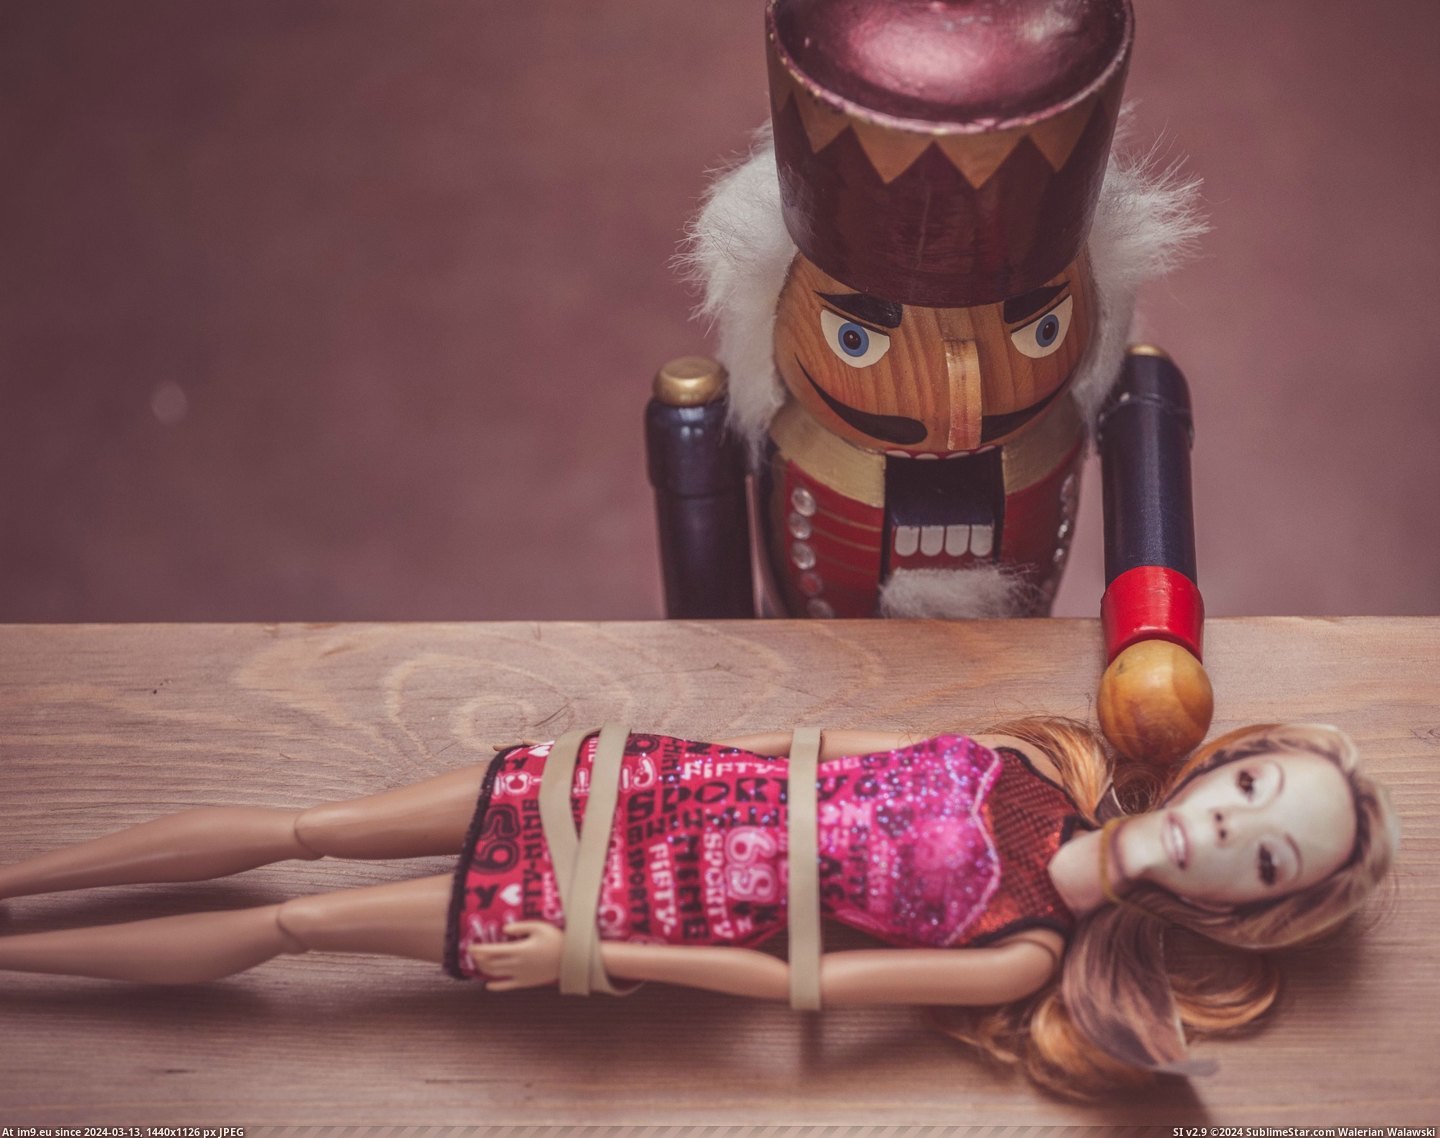 #For #Year #Friend #Stole #Nutcracker #Amazing #Christmas #Got [Pics] Last Christmas I stole my friend's nutcracker - this year, he got these back: 'most amazing thing anyone has done for me  Pic. (Image of album My r/PICS favs))